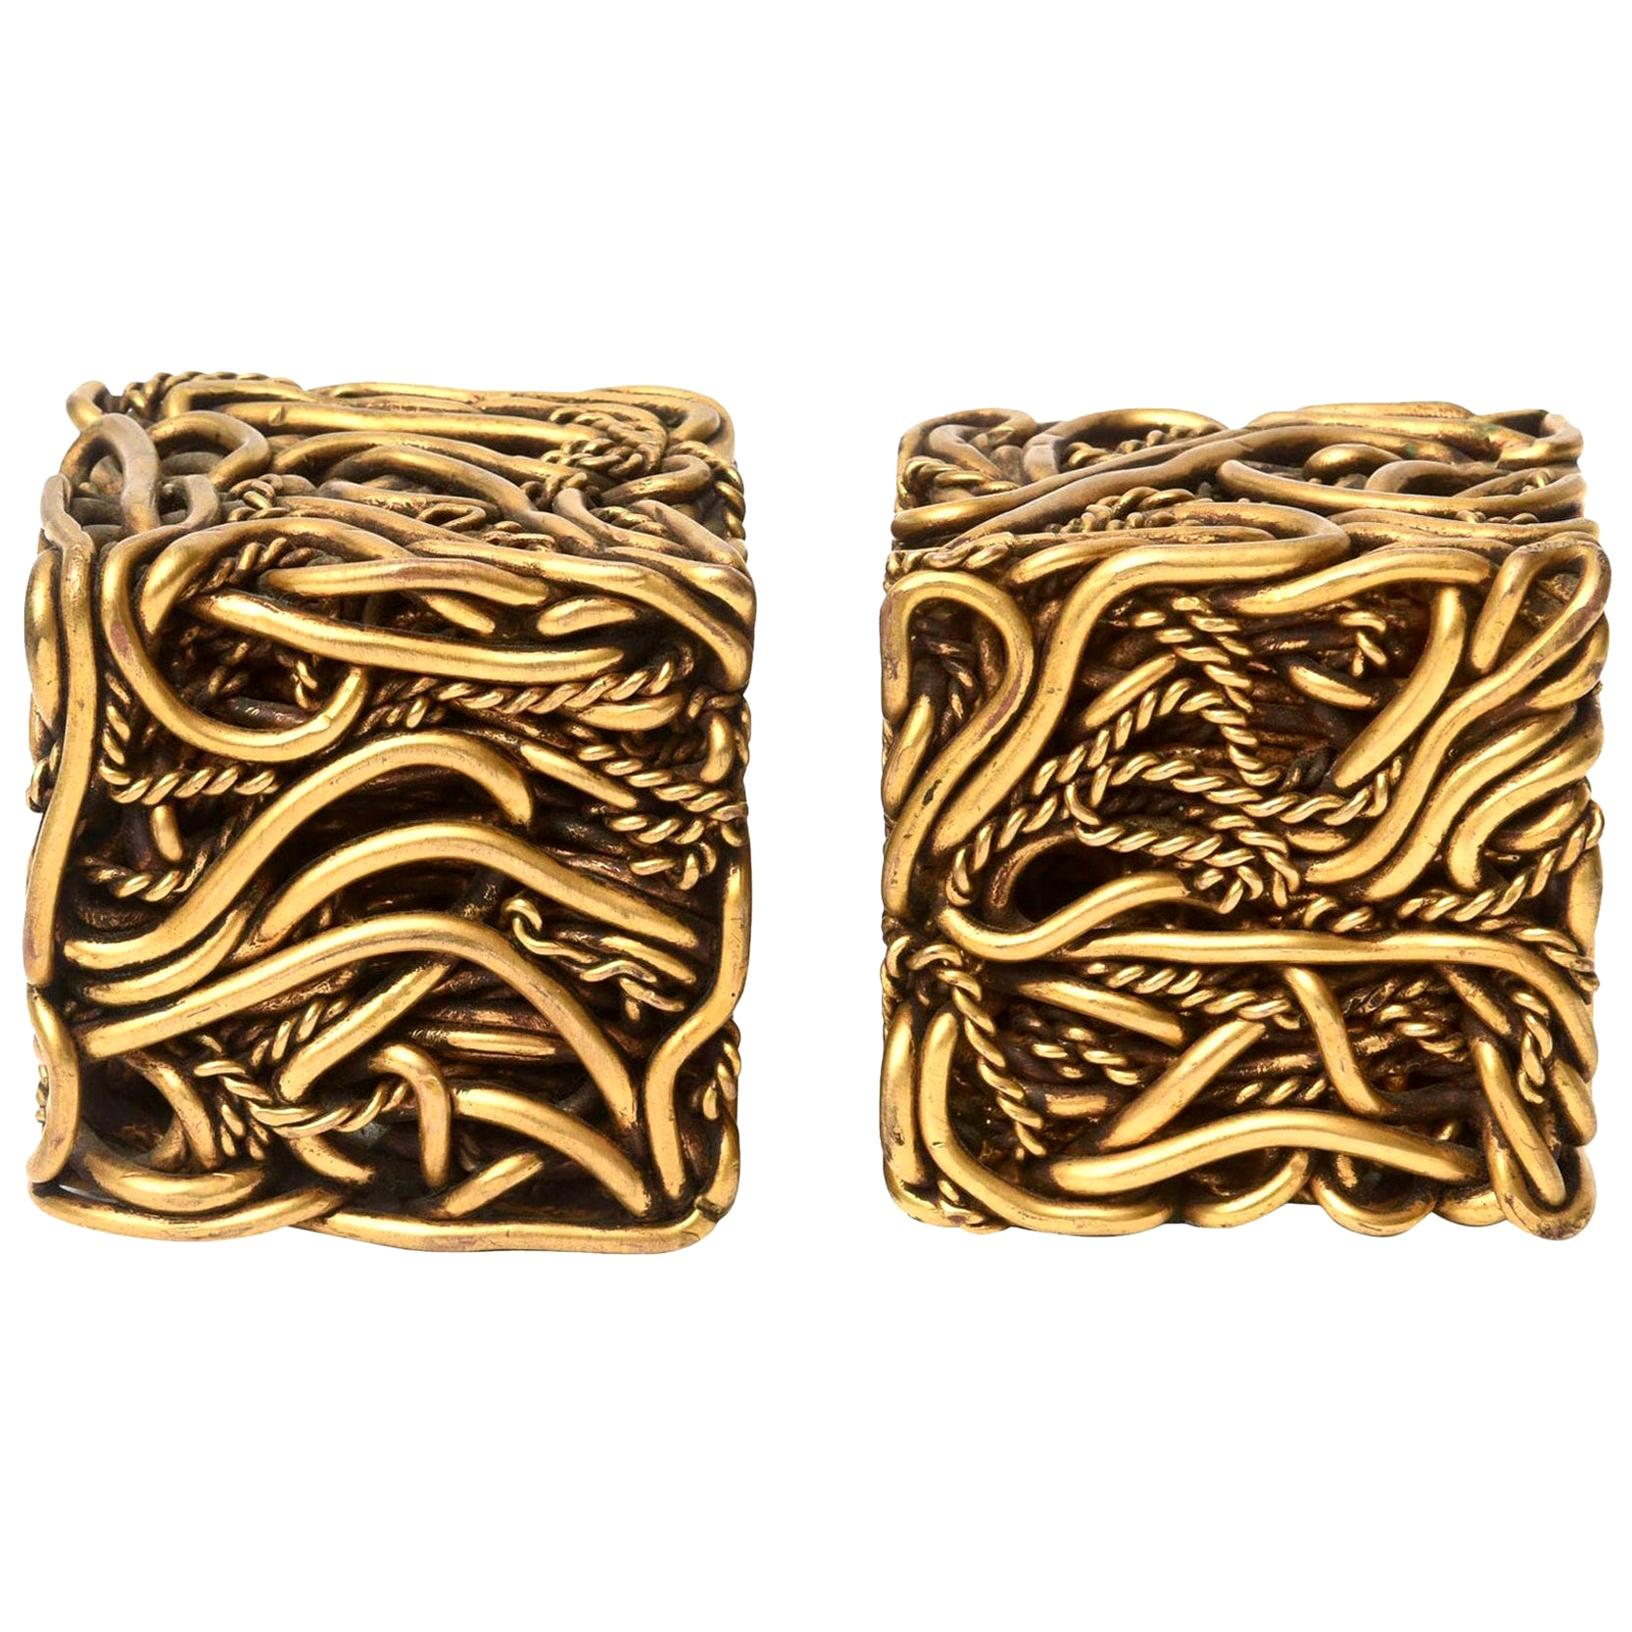 These amazing and fabulous pair of signed French bronze square cube sculptures are meticulously intertwined works of bronze braided and twisted rope giving a spaghetti like design. They were purchased in France and signed on one of them Yascal. They